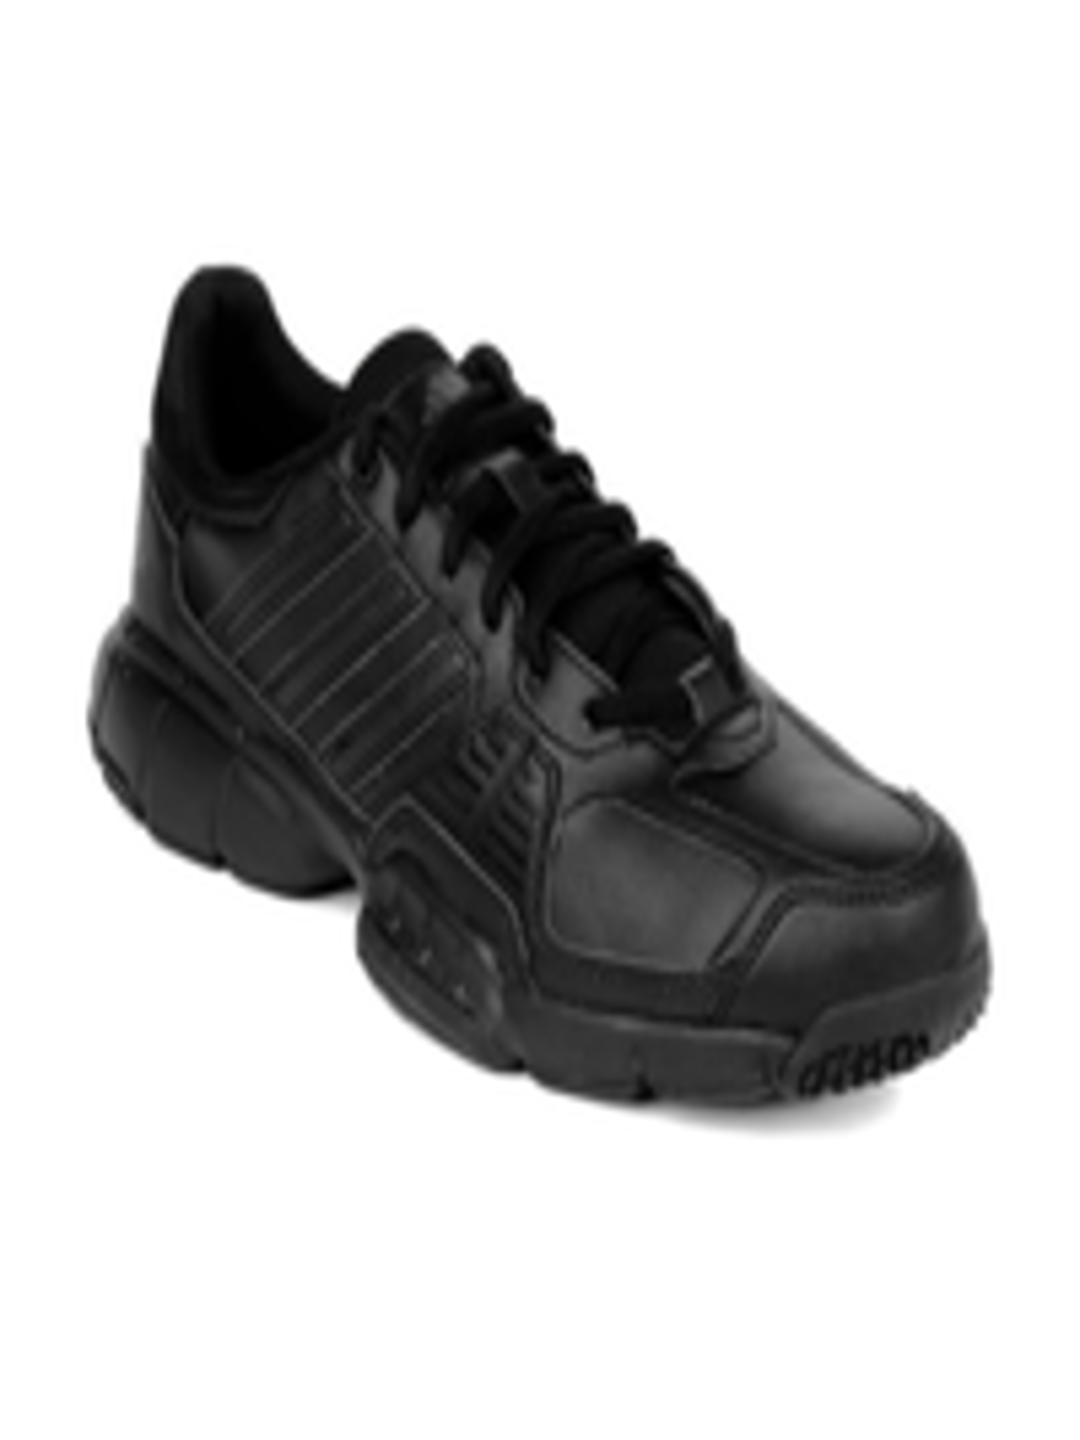 Buy ADIDAS Men Black Besulik Trainer II Sports Shoes - Sports Shoes for ...